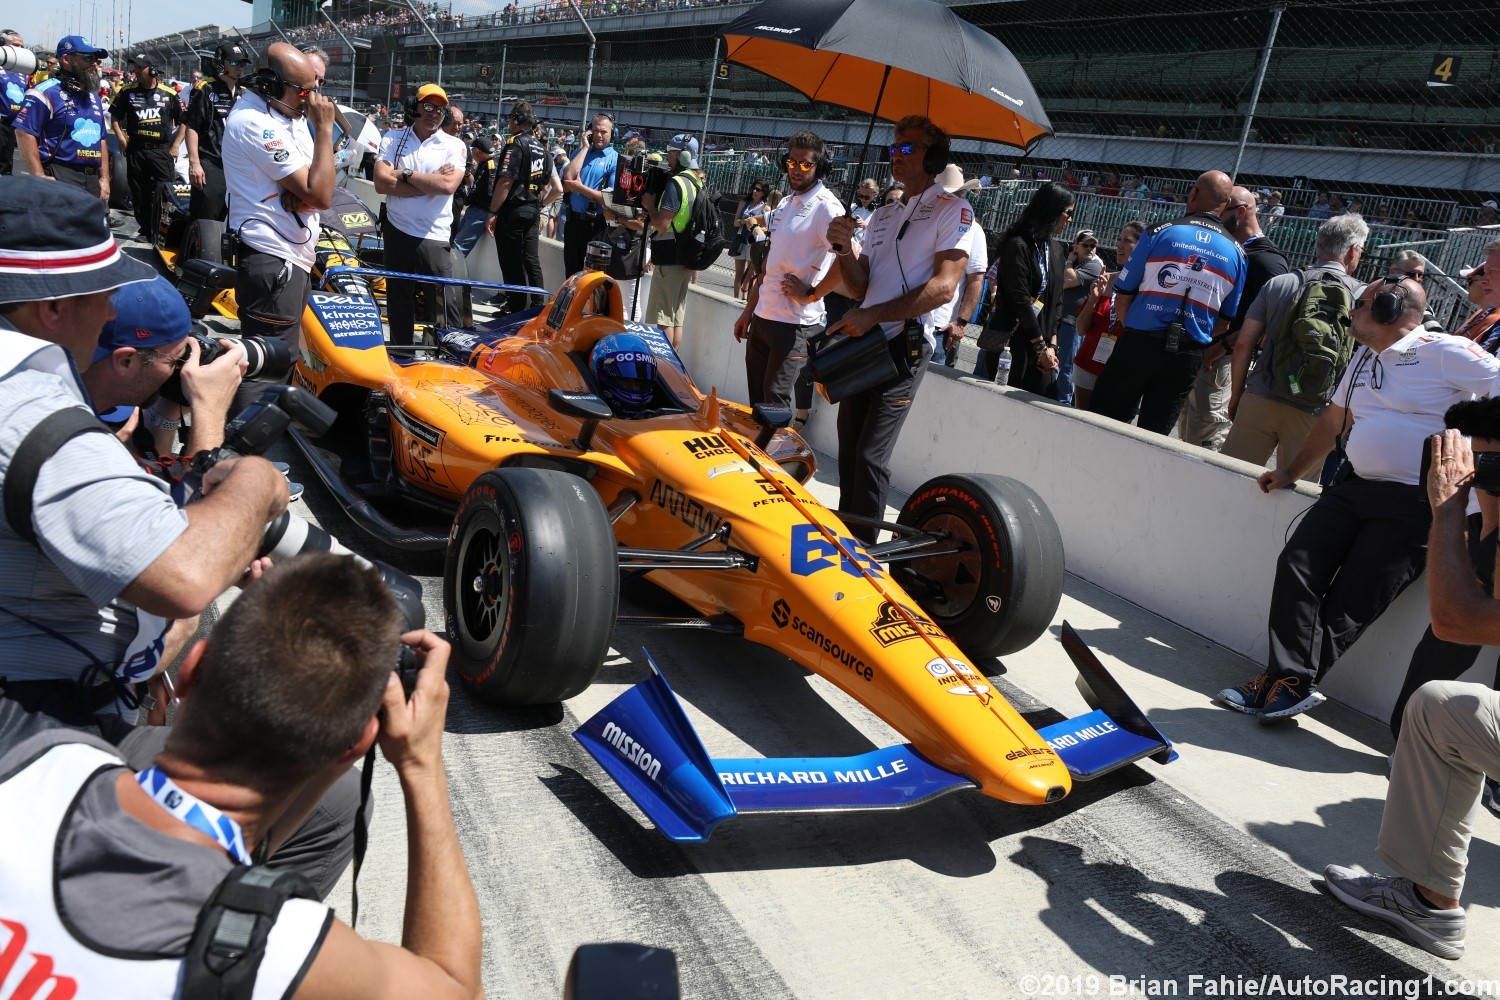 McLaren may fail to qualify for the Indy 500, then come this news